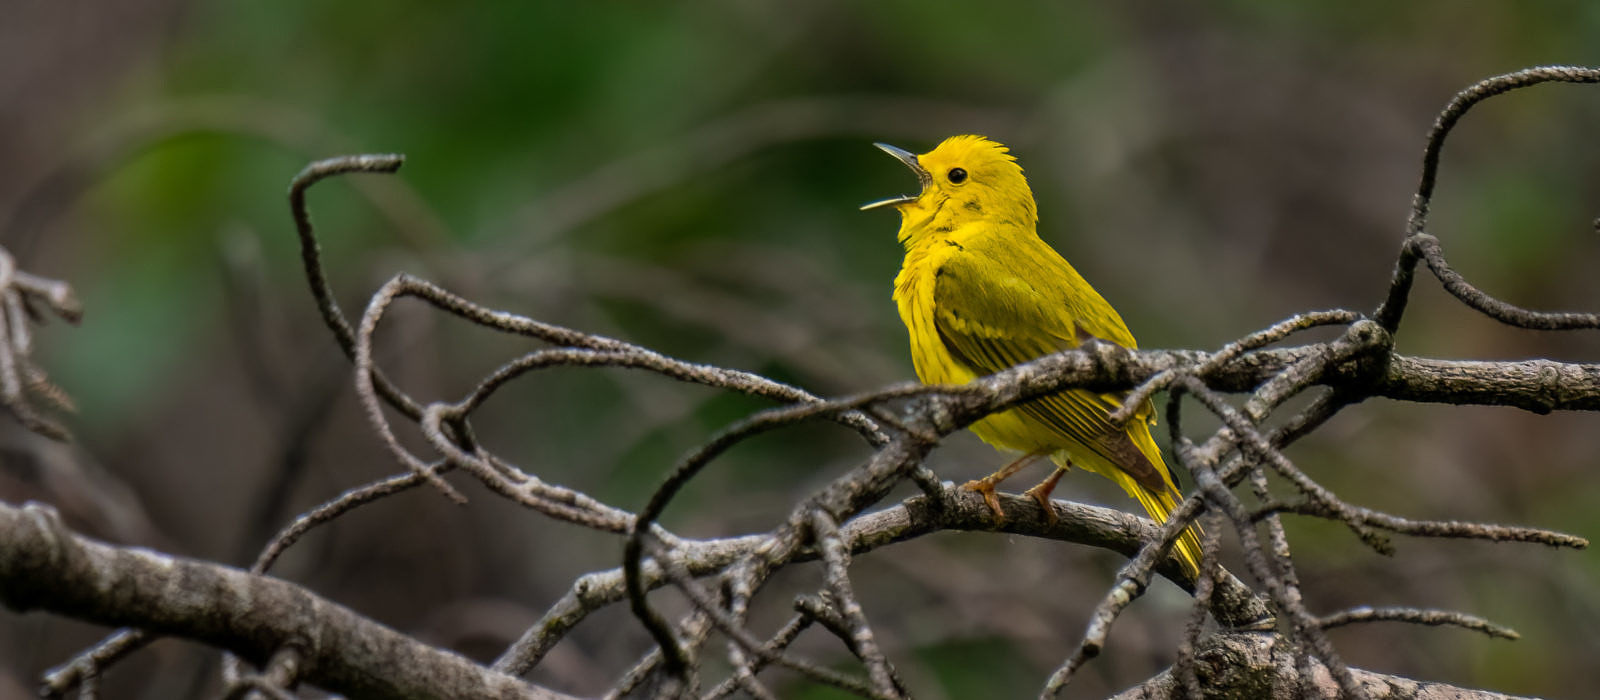 A Yellow Warbler, singing among a tangle of branches. (photo © Tom Momeyer)